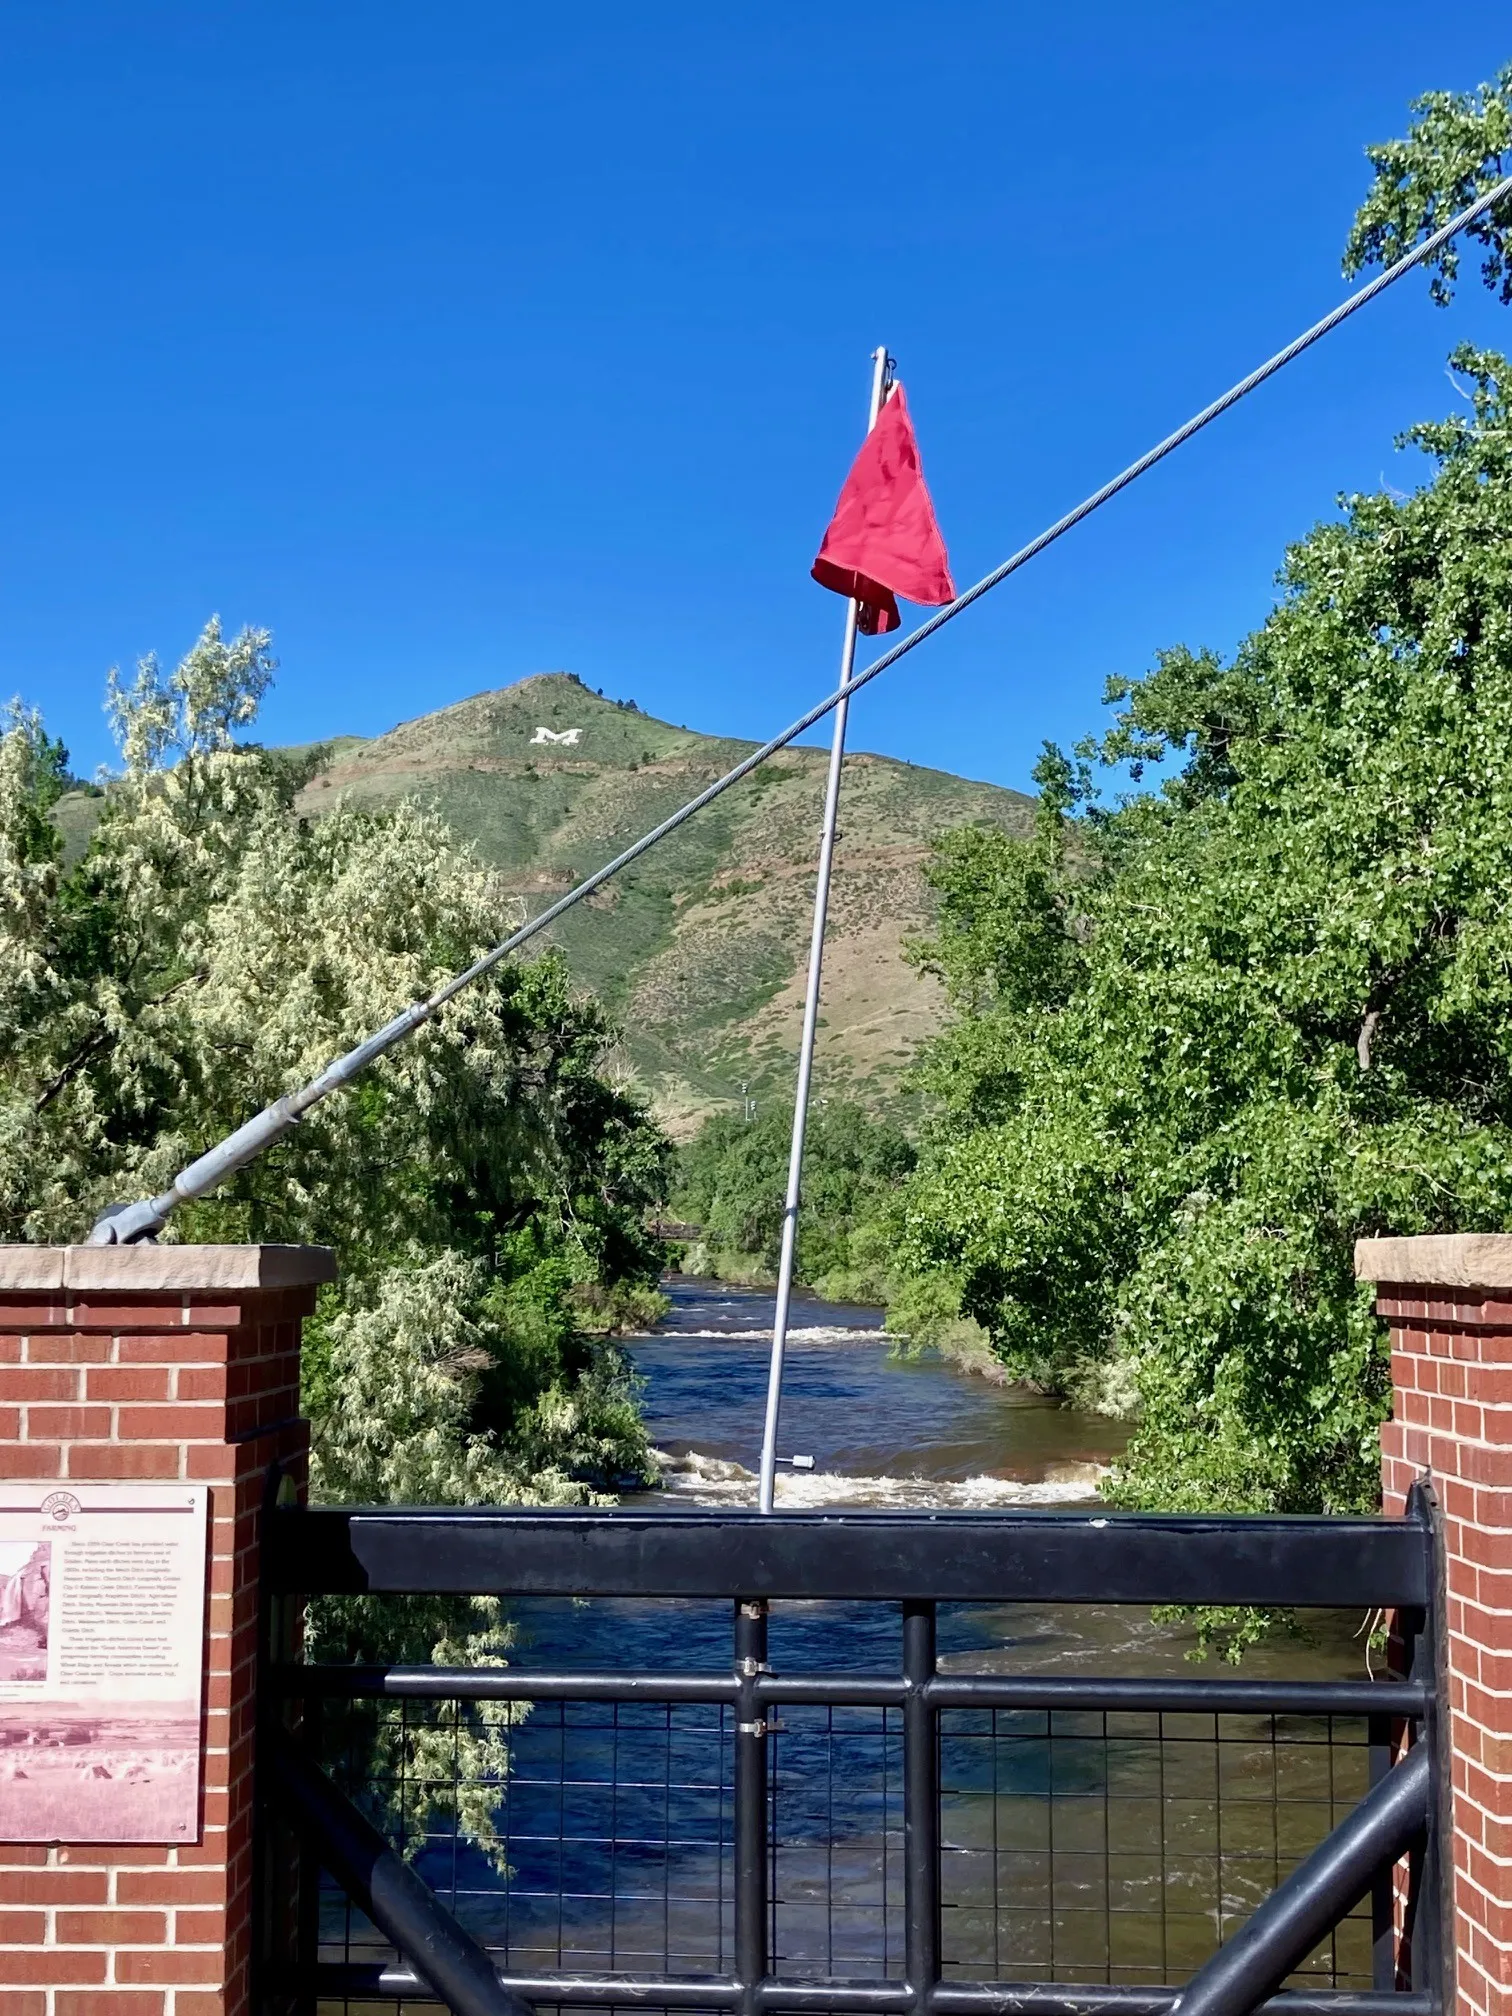 Red flag hanging on the Washington Avenue bridge above Clear Creek.  Mt. Zion in the background